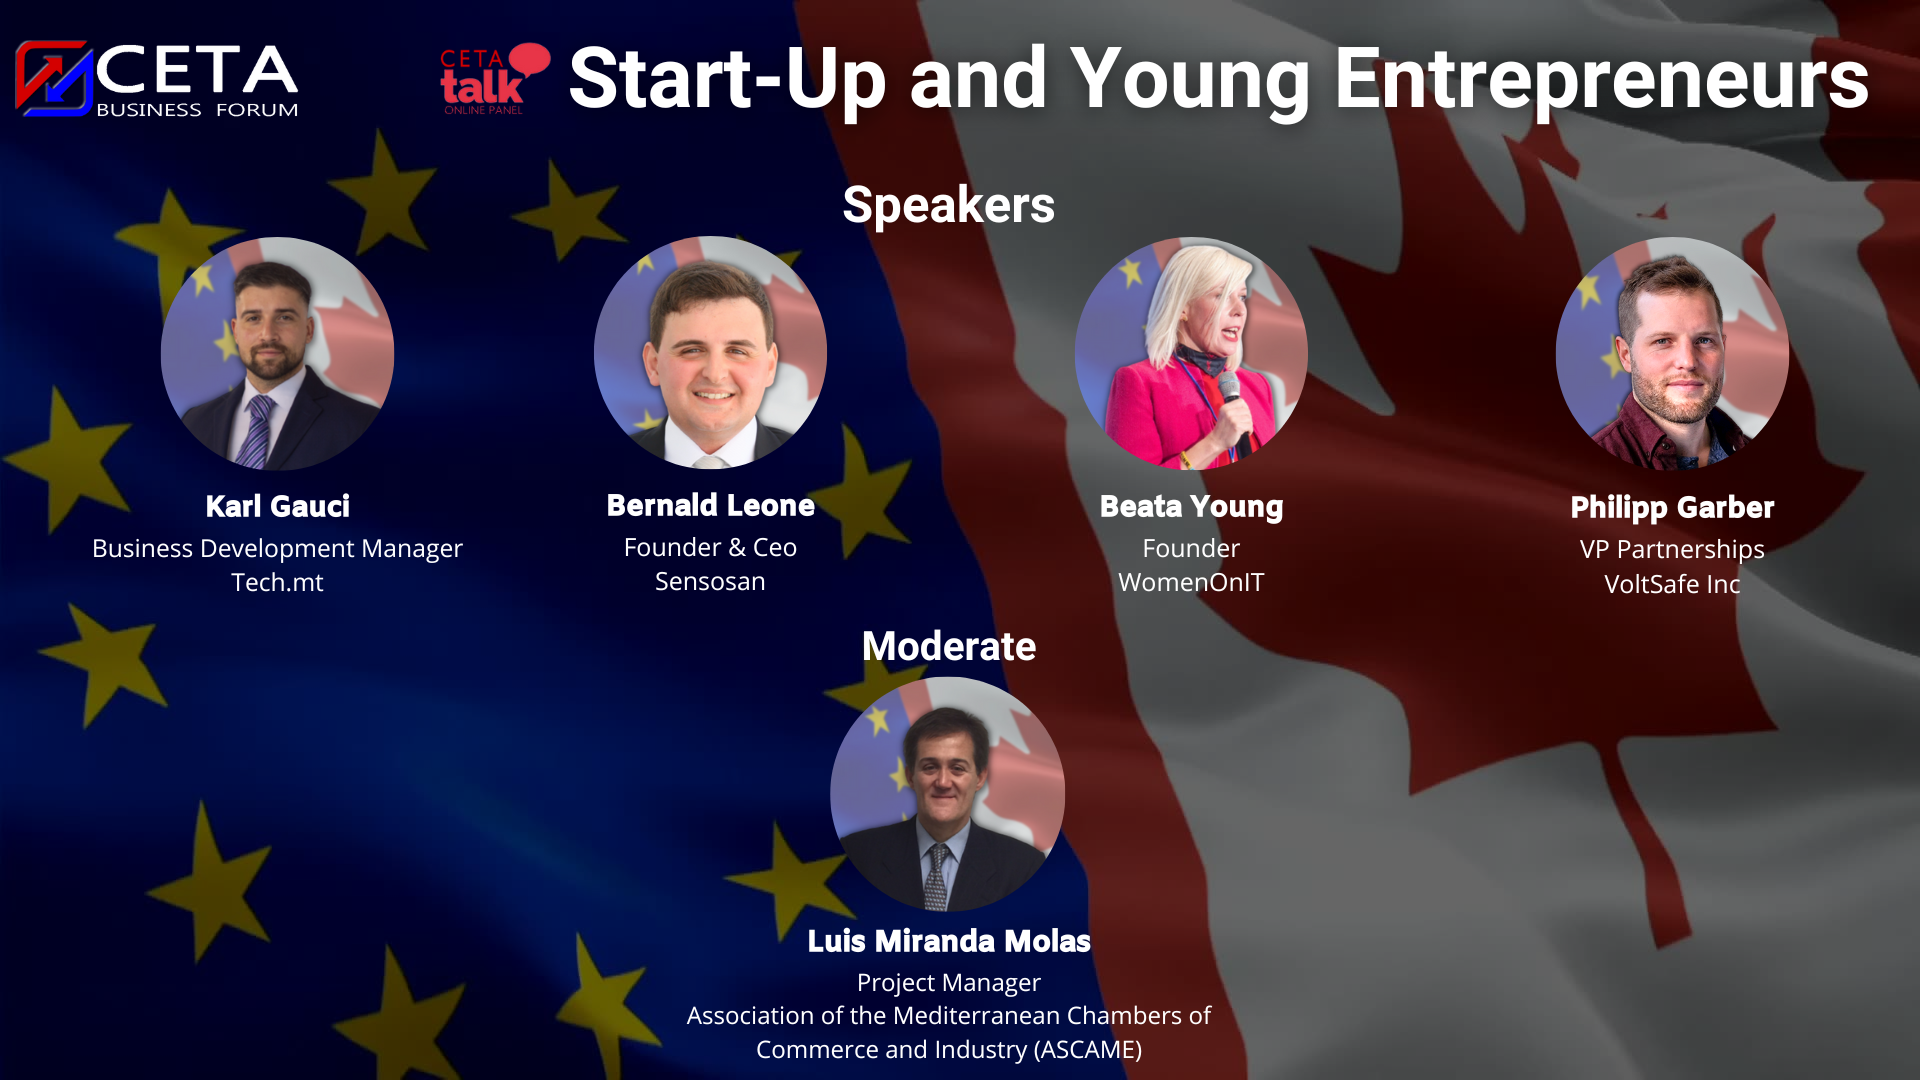 Image_Video_CETA_Talk_Start-Up_and_Young_Entrepreneurs